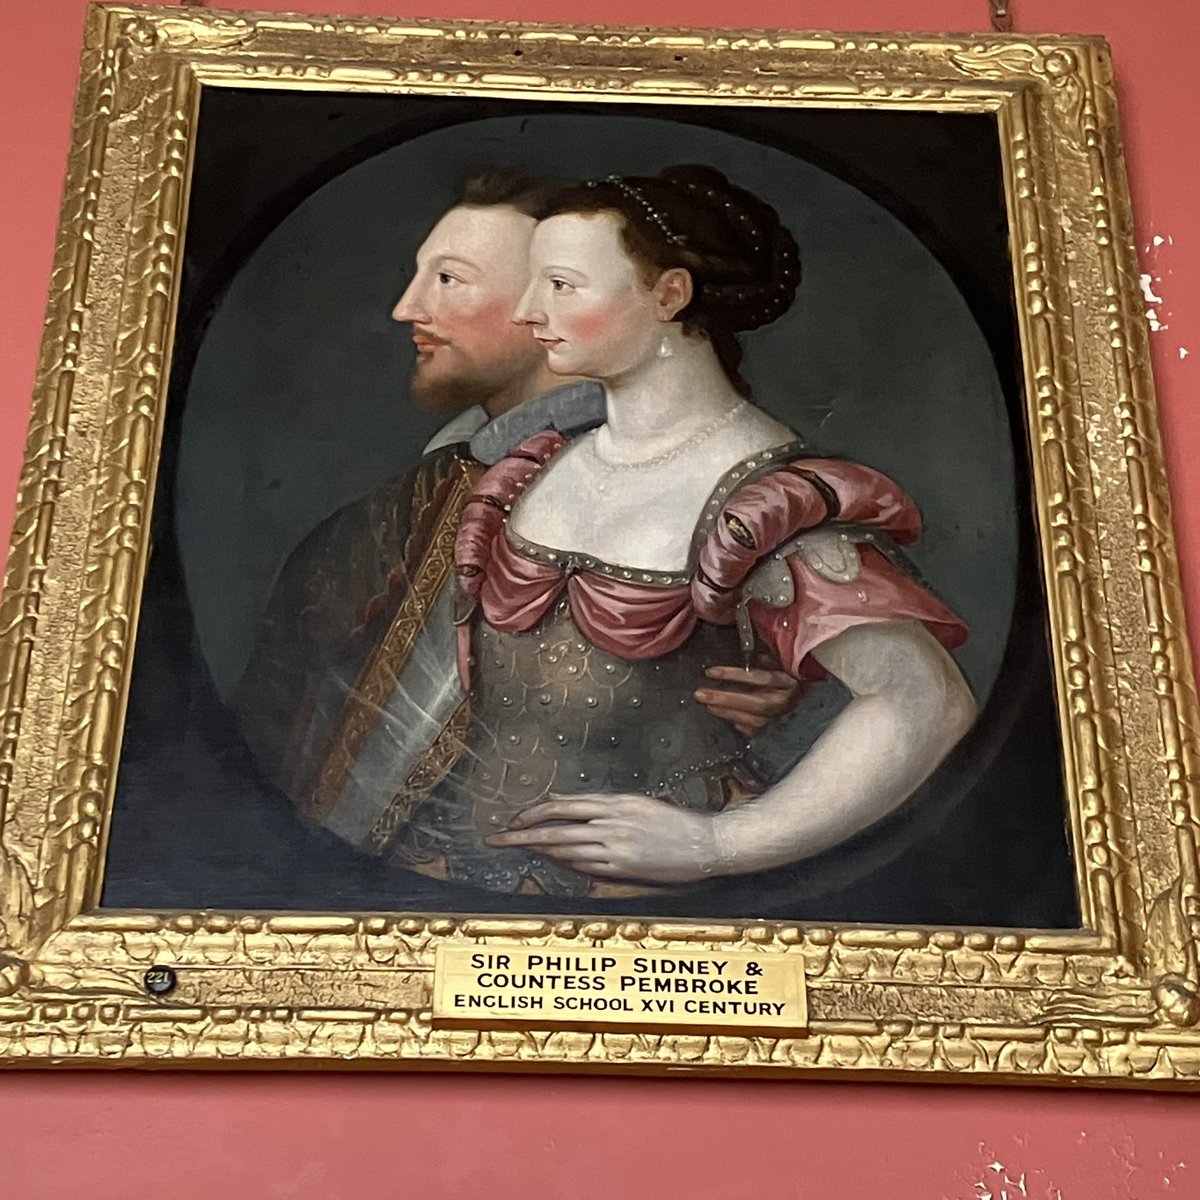 Really loved this joint portrait of Philip and Mary Sidney